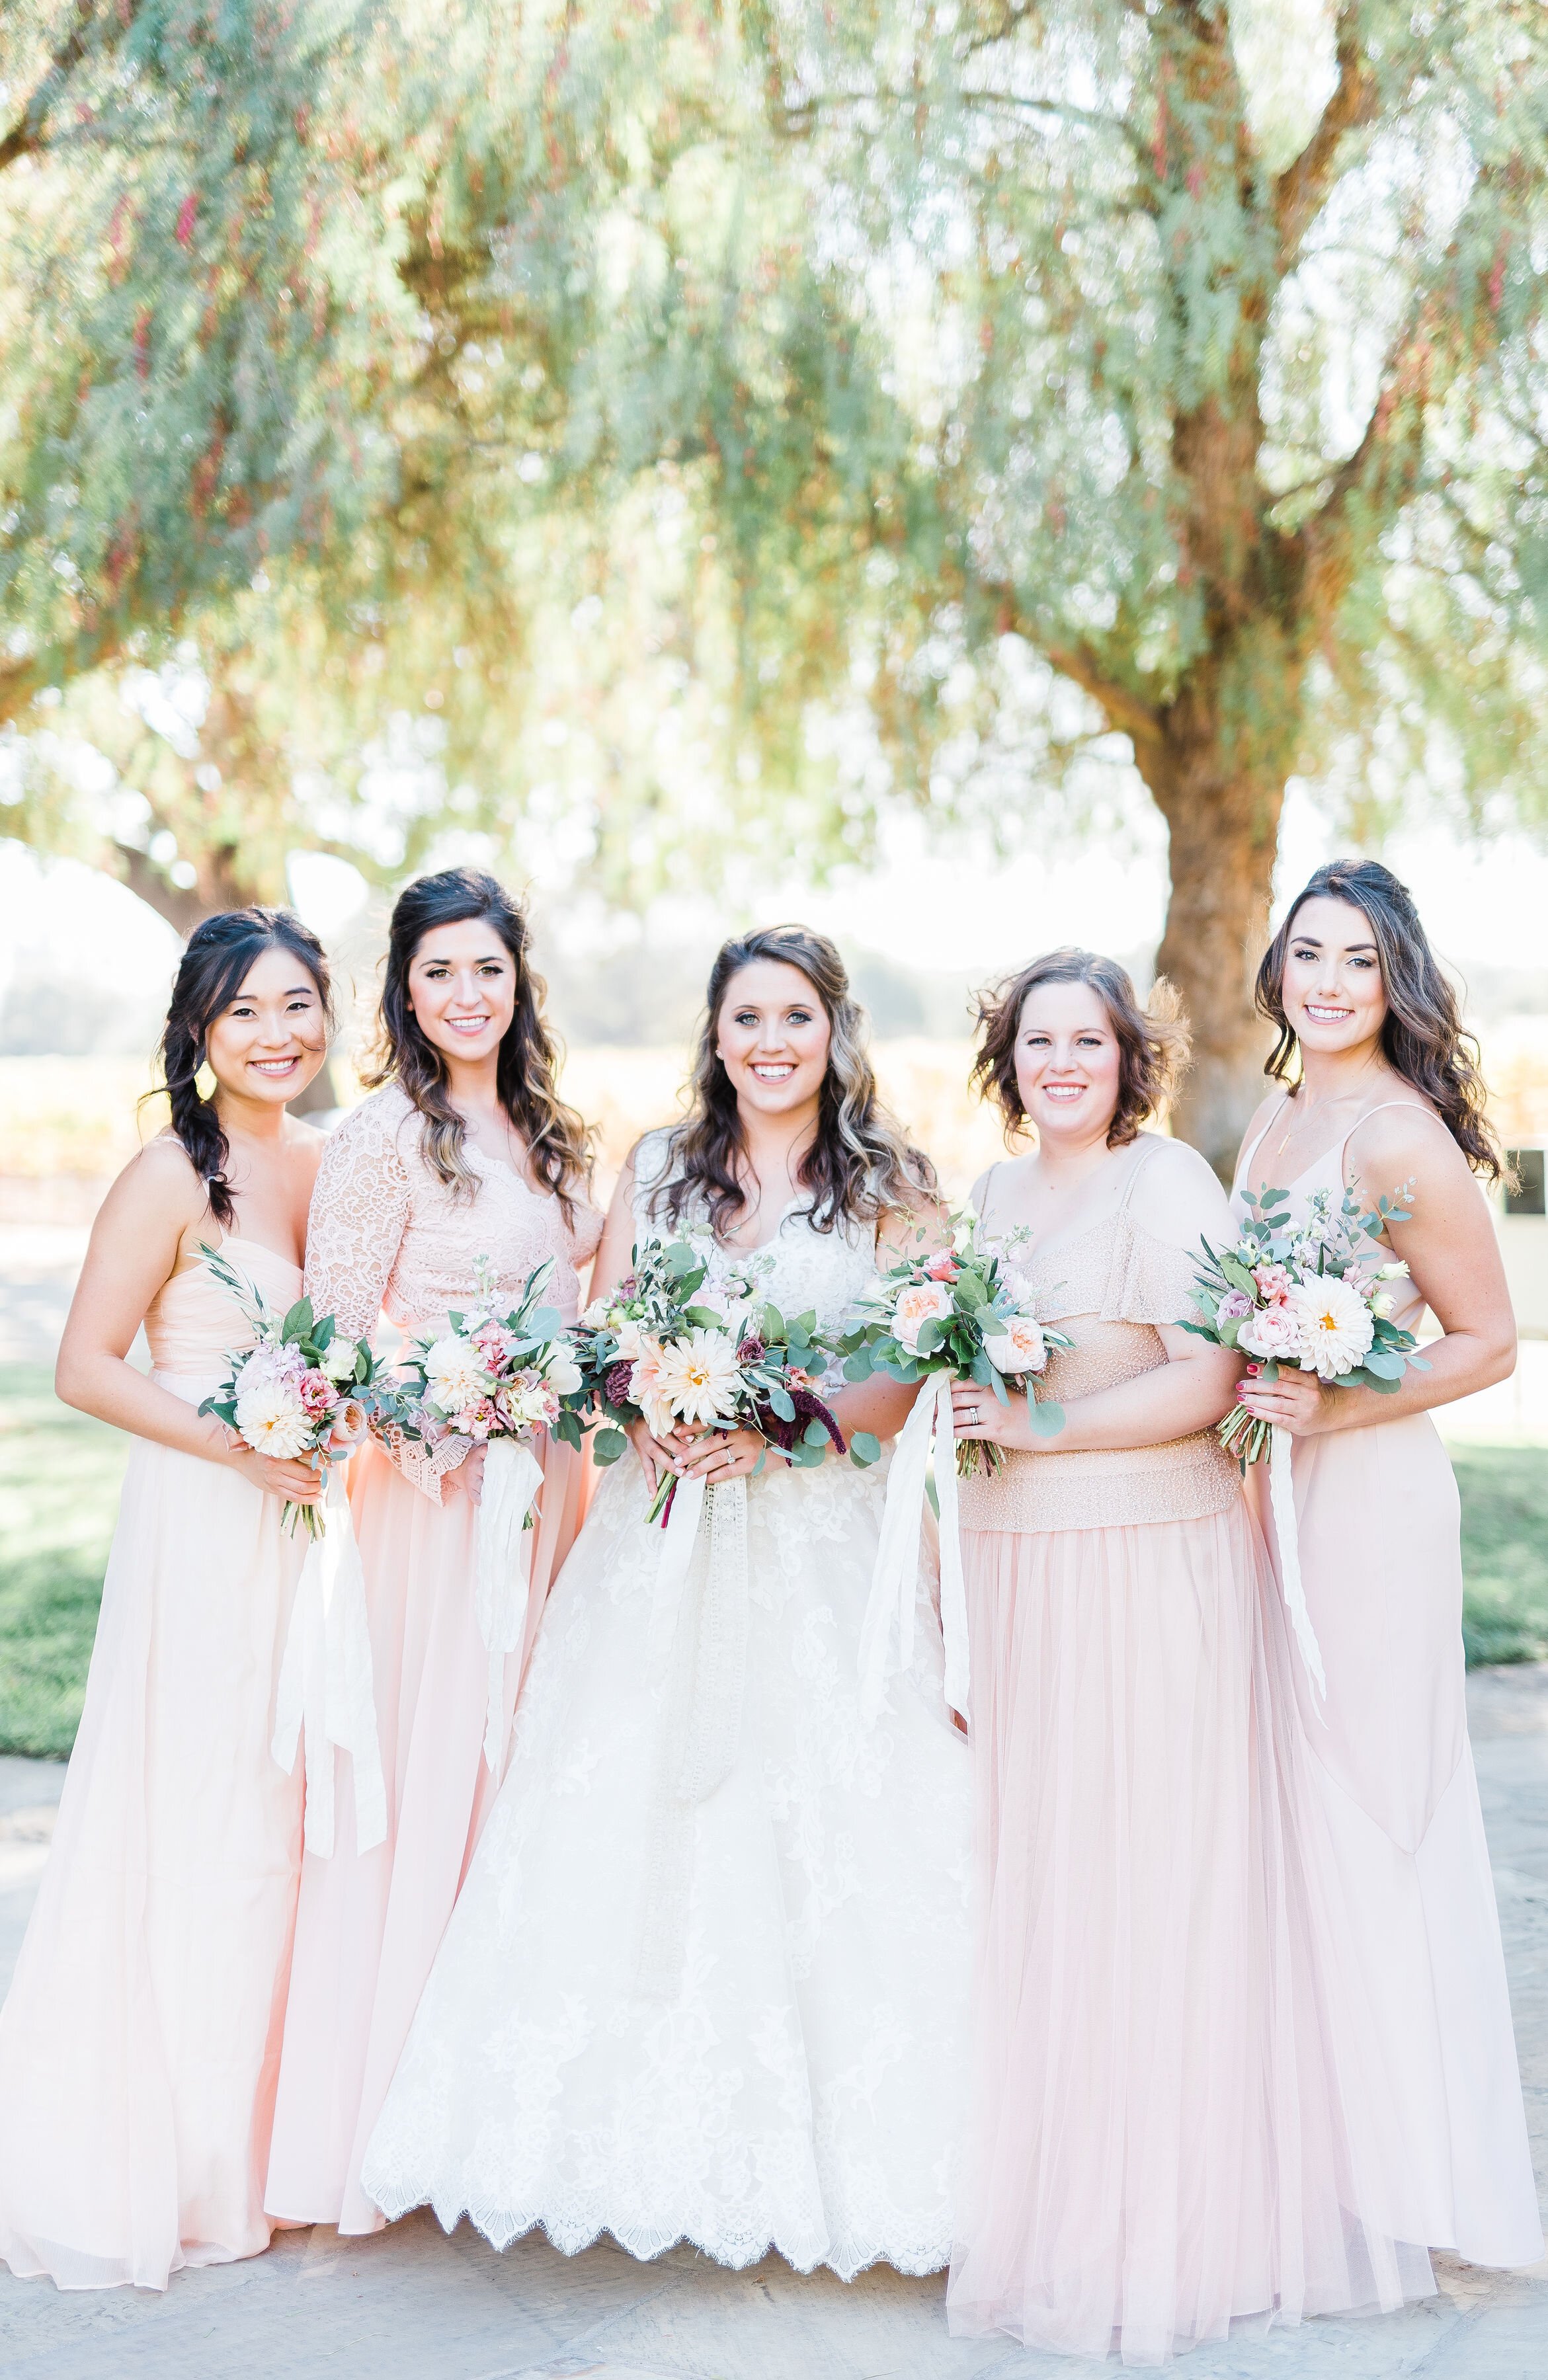 www.santabarbarawedding.com | Roblar Winery and Farm | Brittany Taylor Photography | Bride and Bridesmaids with Bouquets